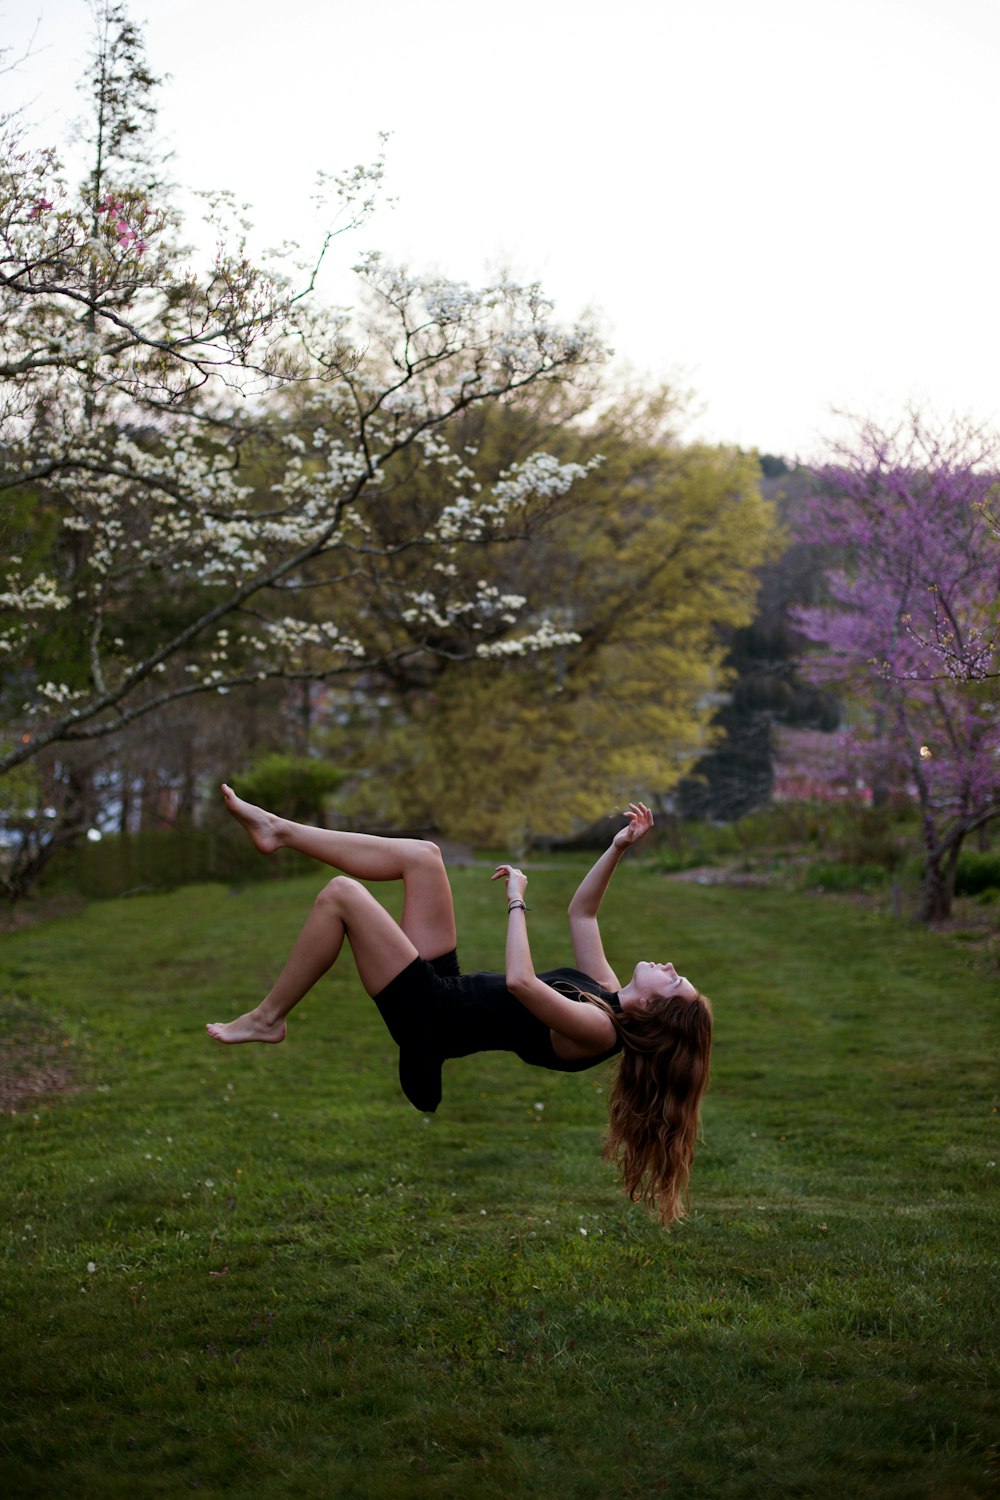 woman back flipping in the garden